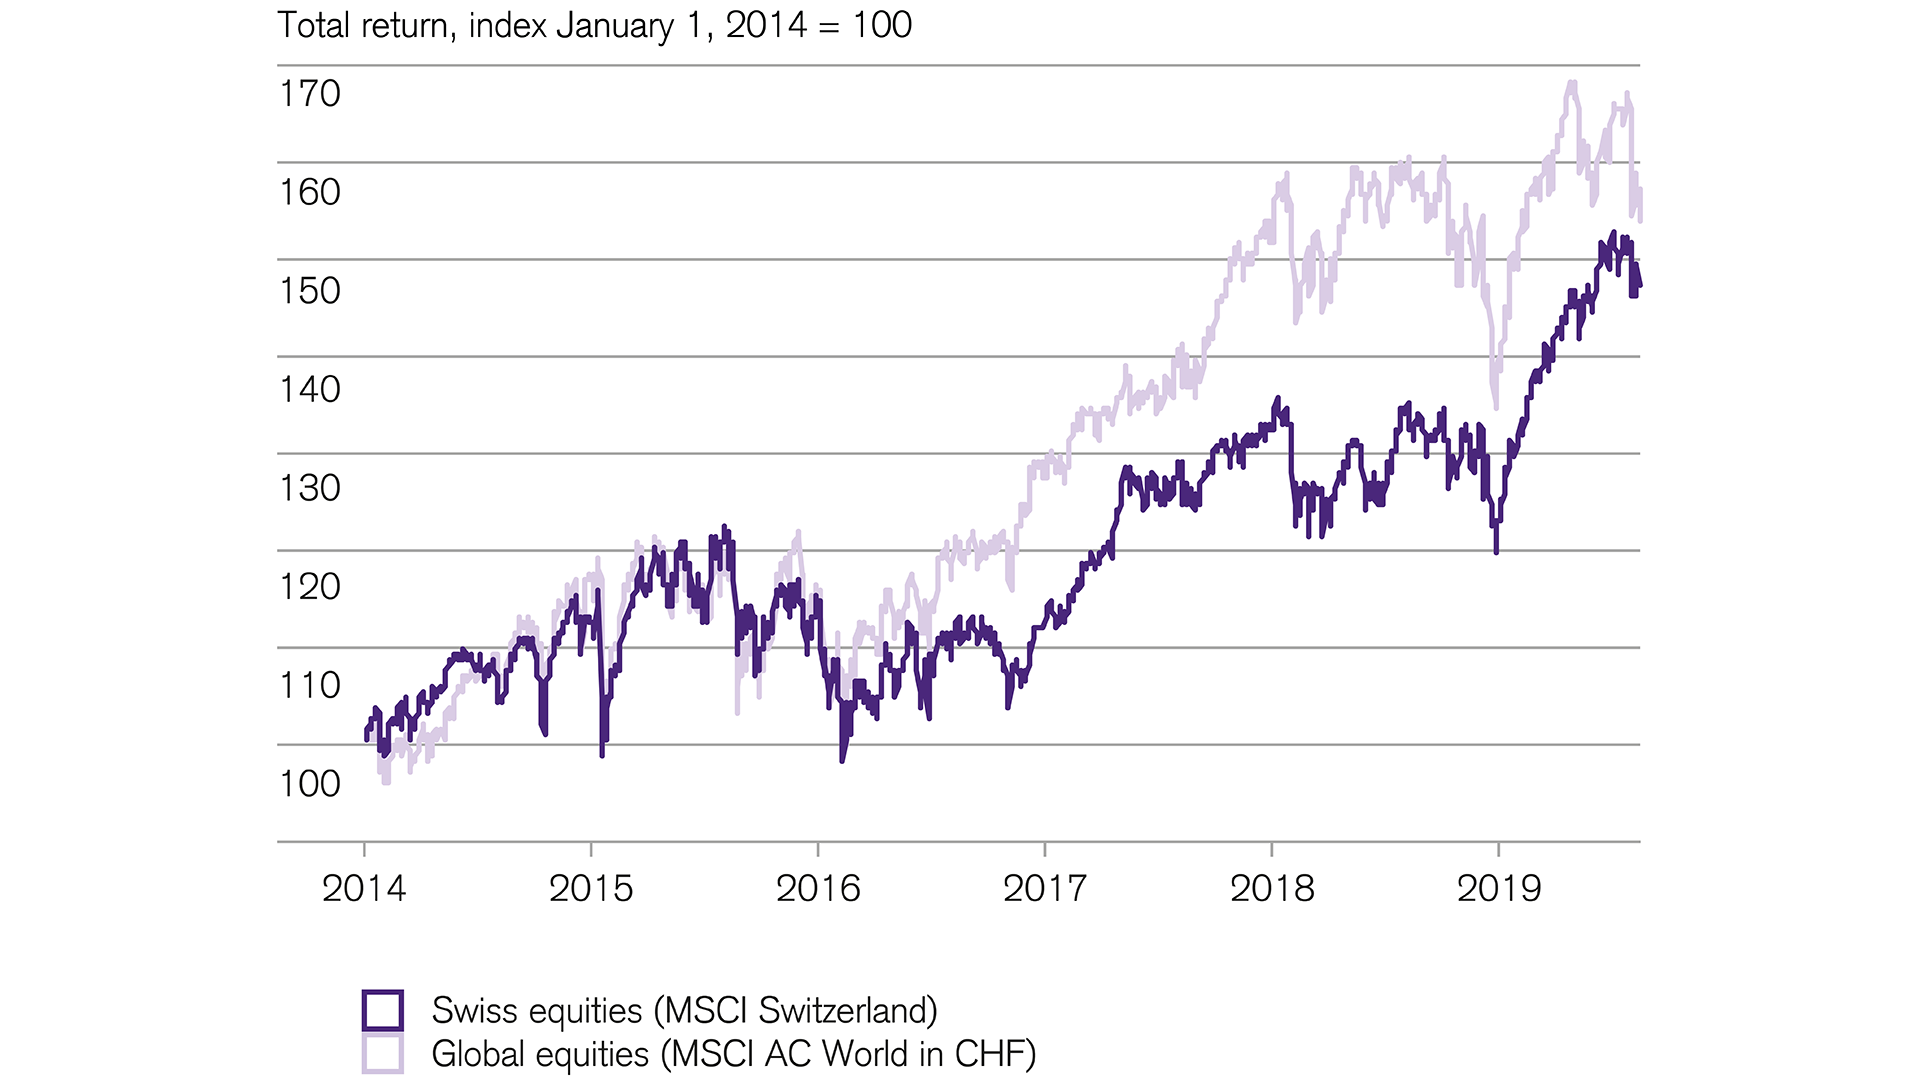 Strong returns for swiss equities in 2019